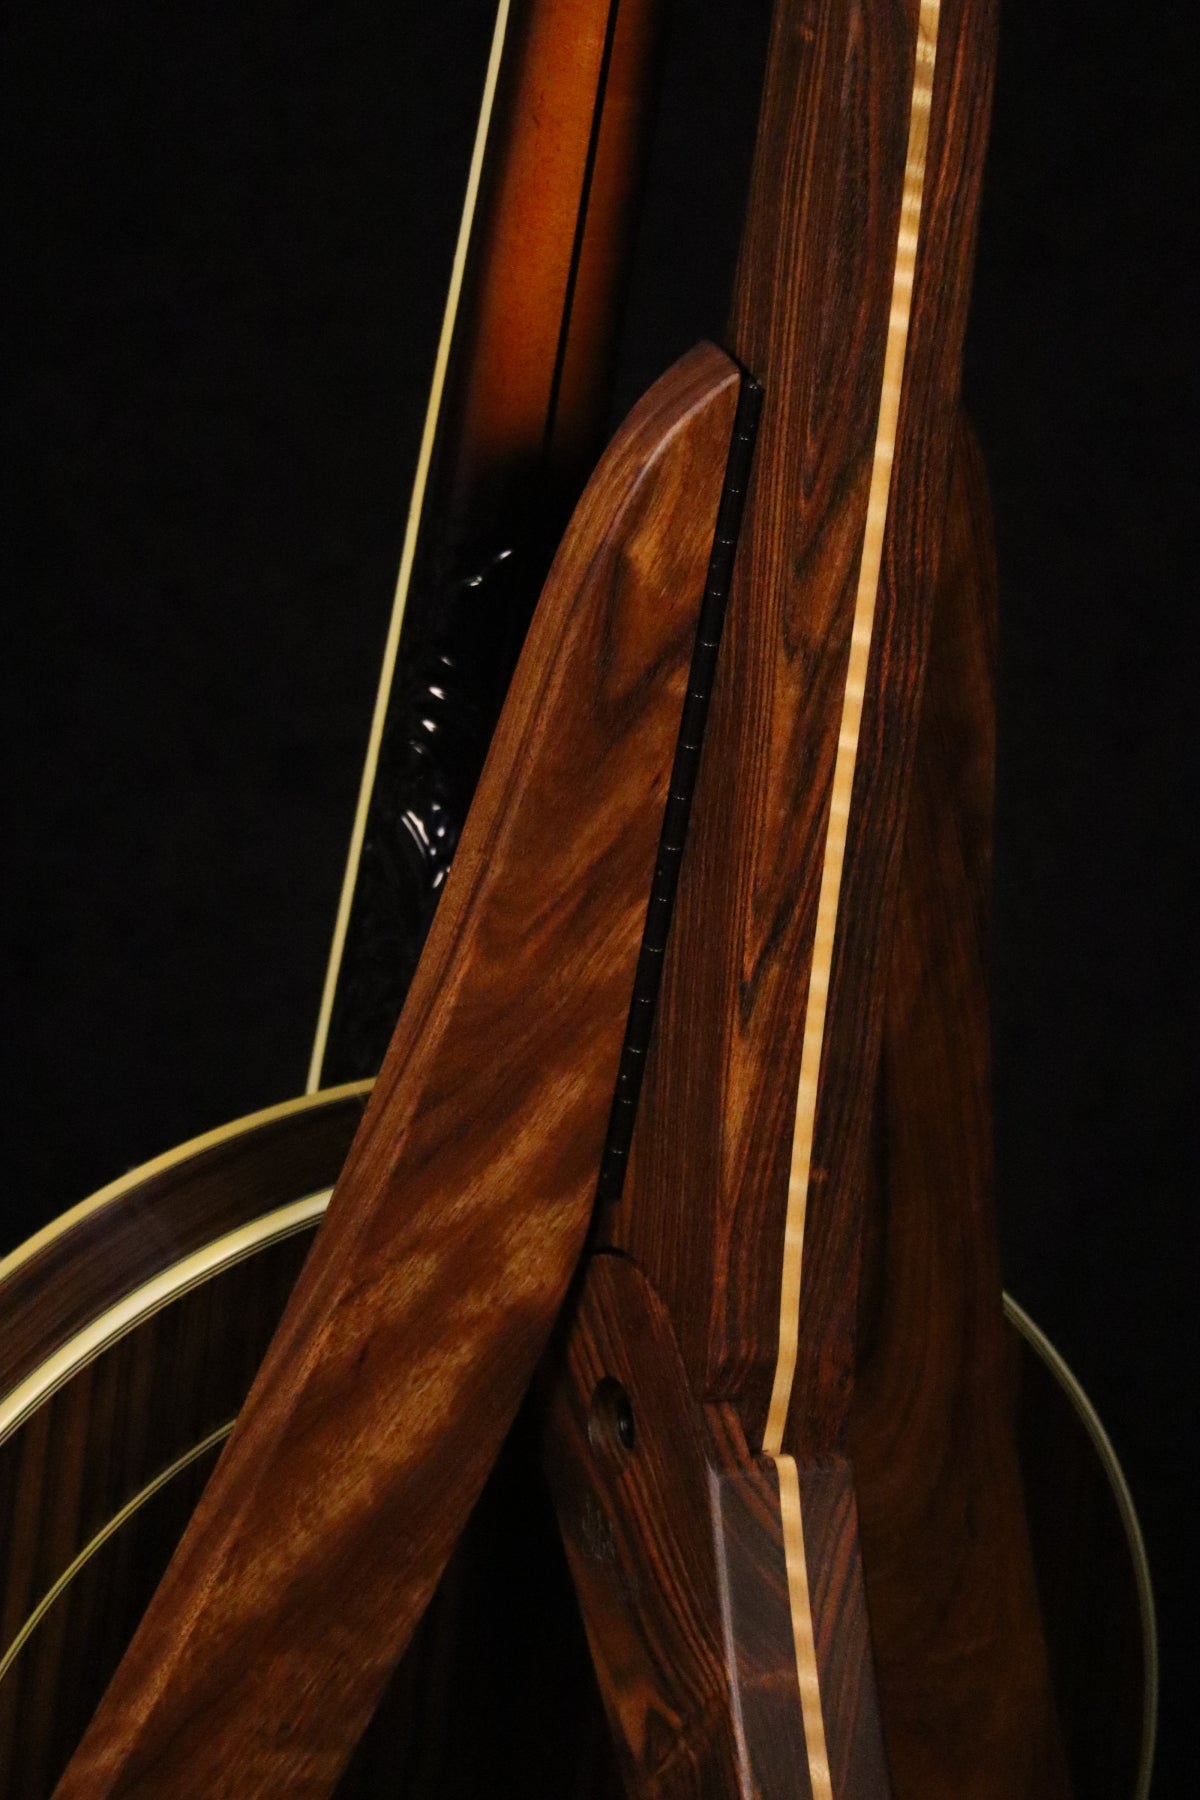 Folding chechen Caribbean rosewood and curly maple wood banjo floor stand closeup rear image with Alvarez banjo